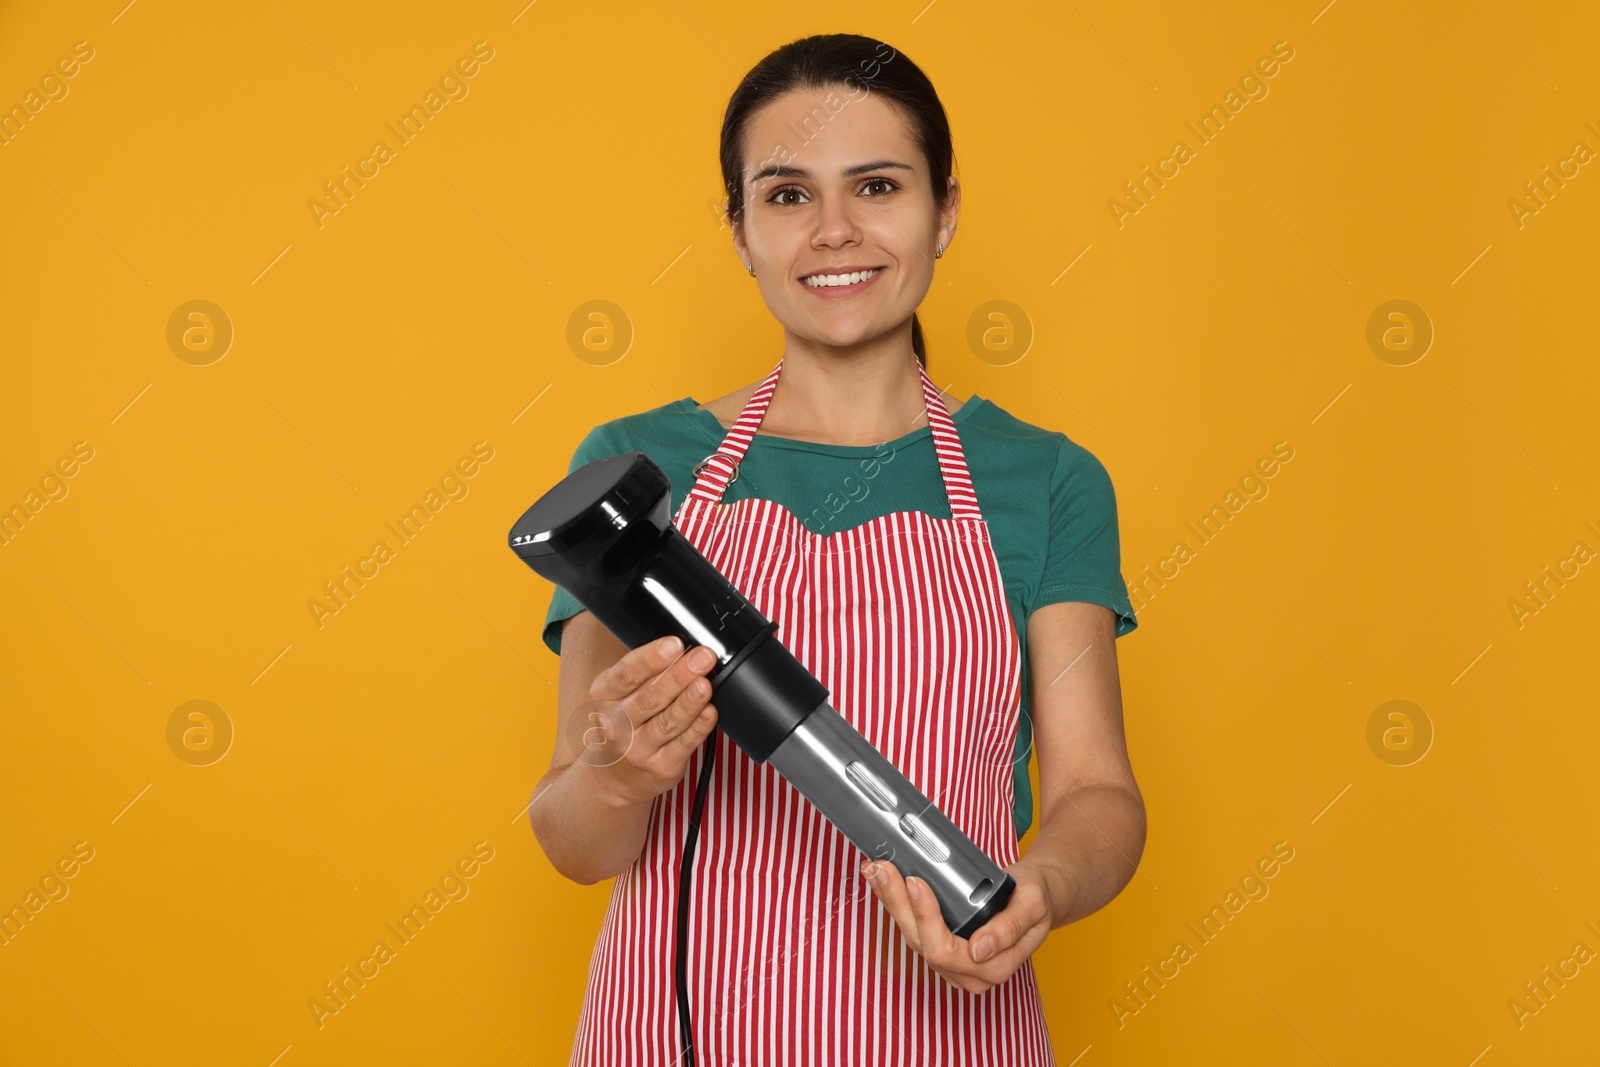 Photo of Beautiful young woman holding sous vide cooker on orange background